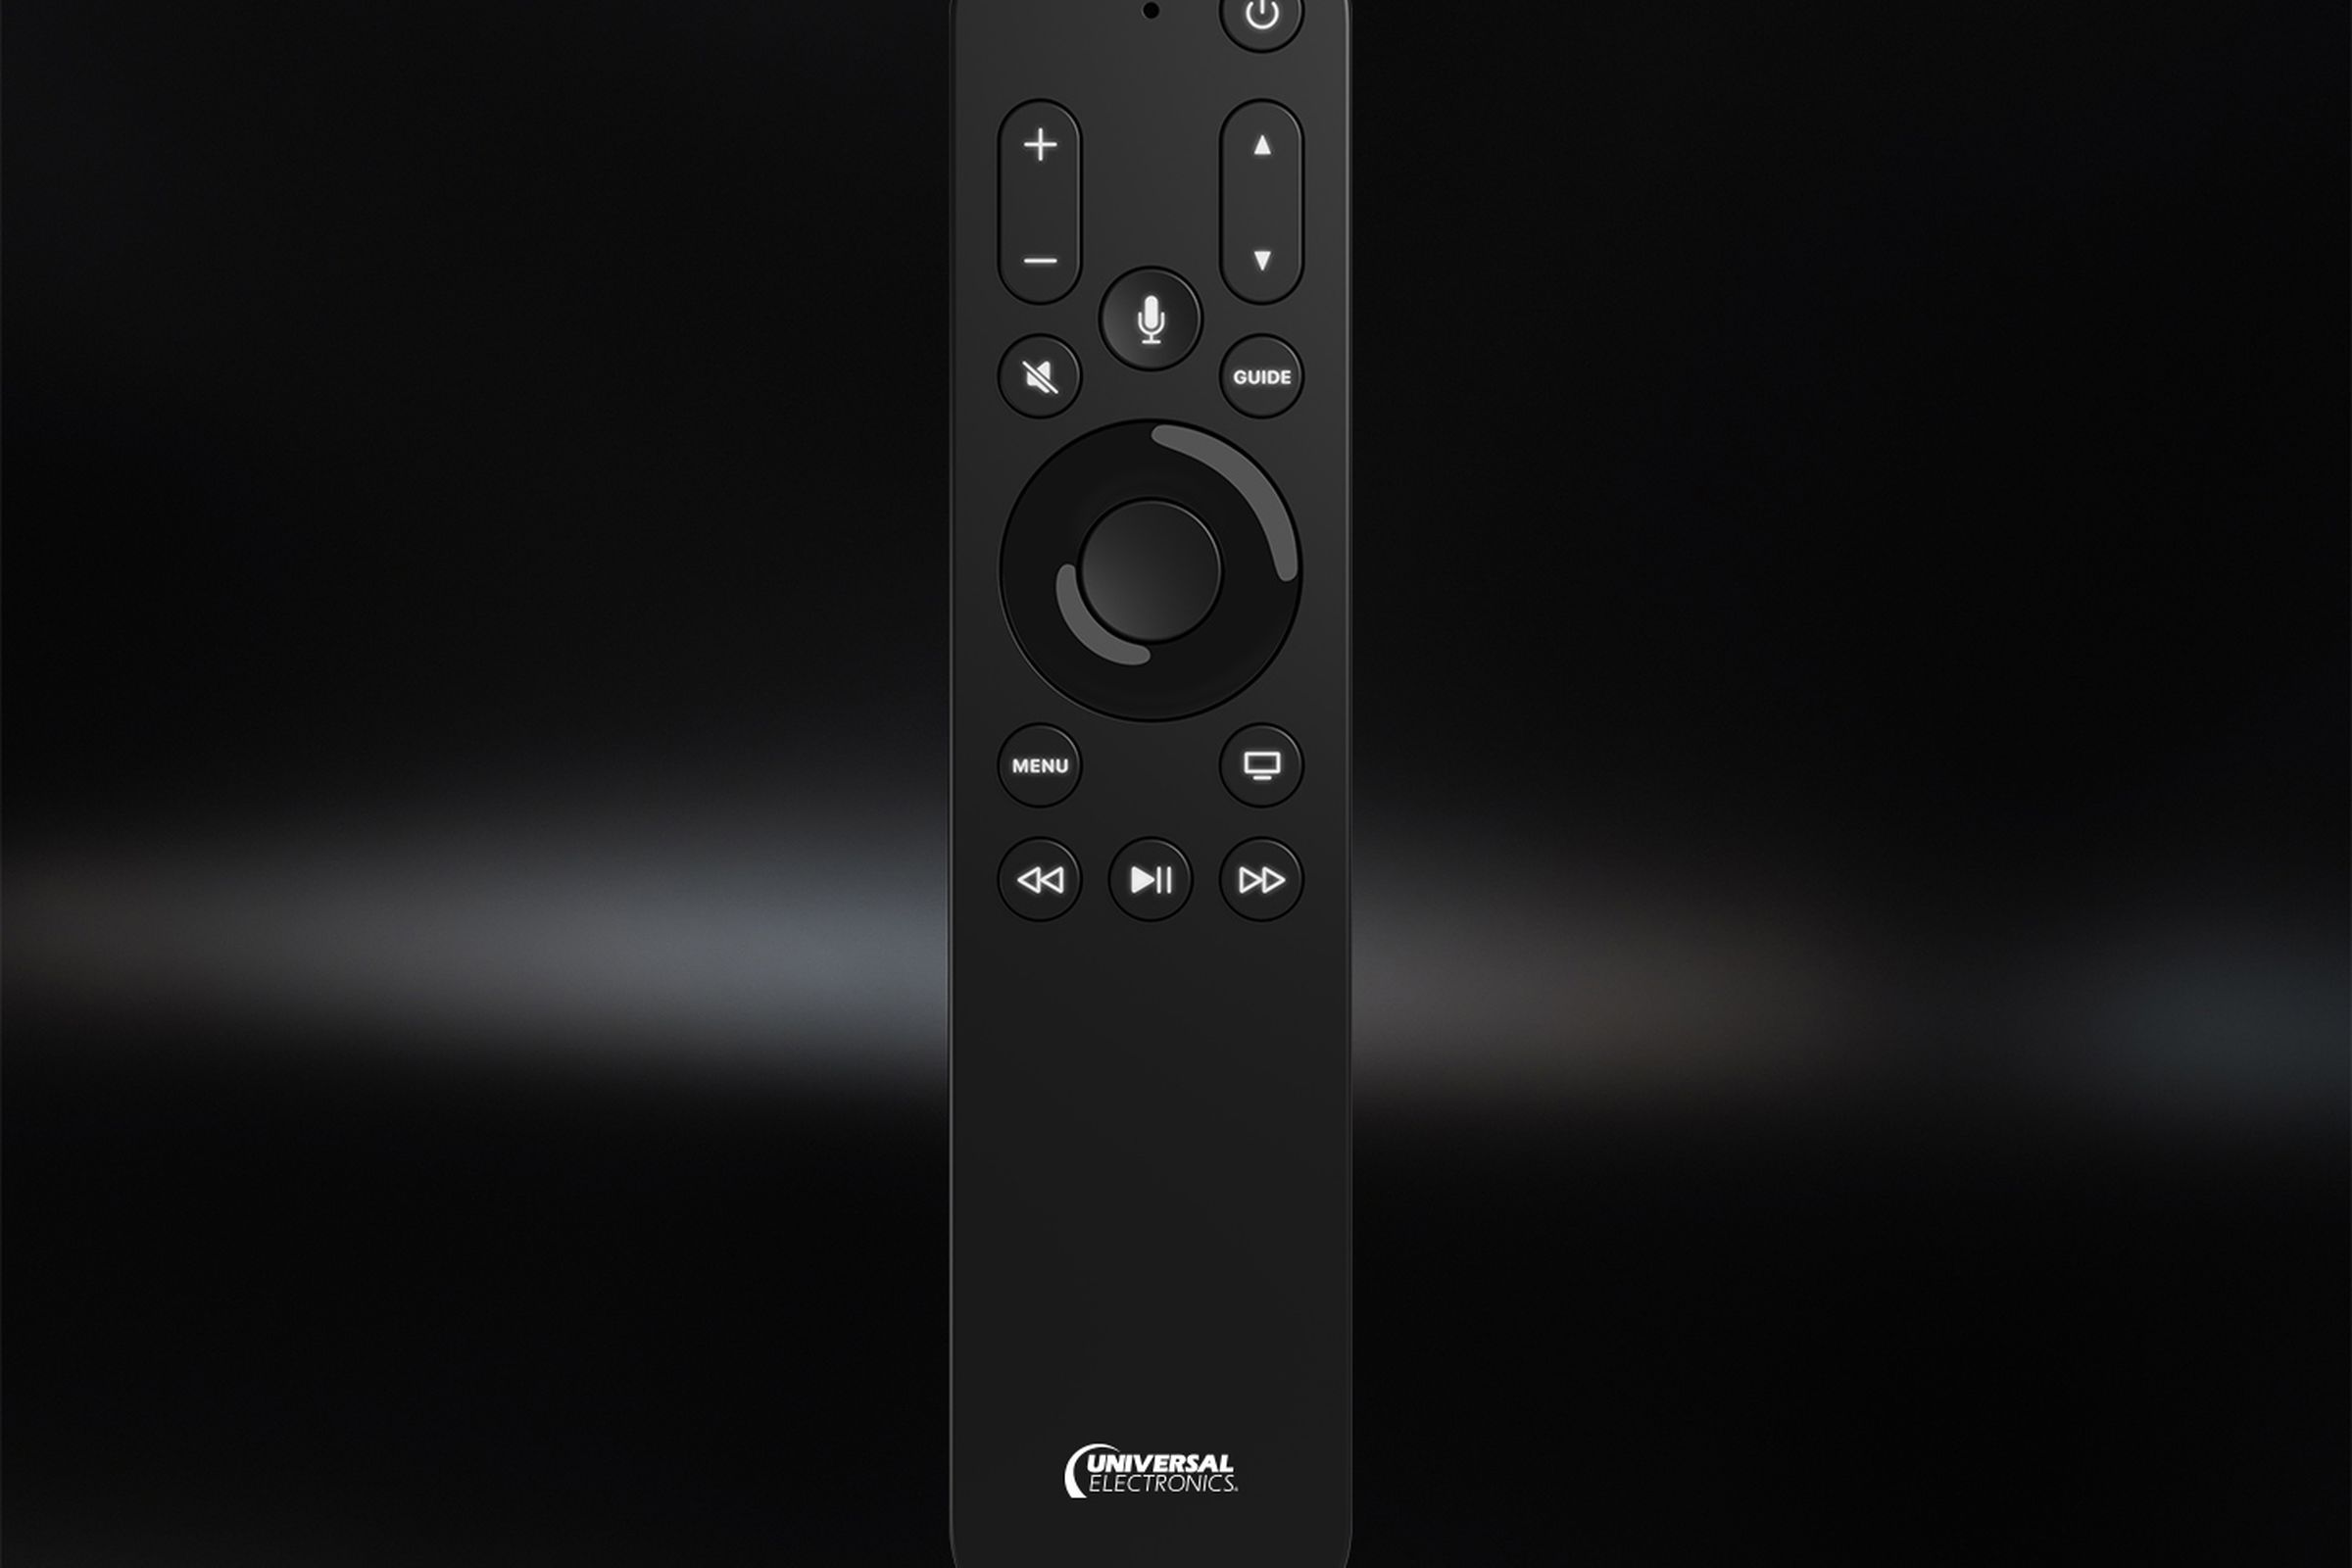 Universal Electronics new remote is for Apple TV